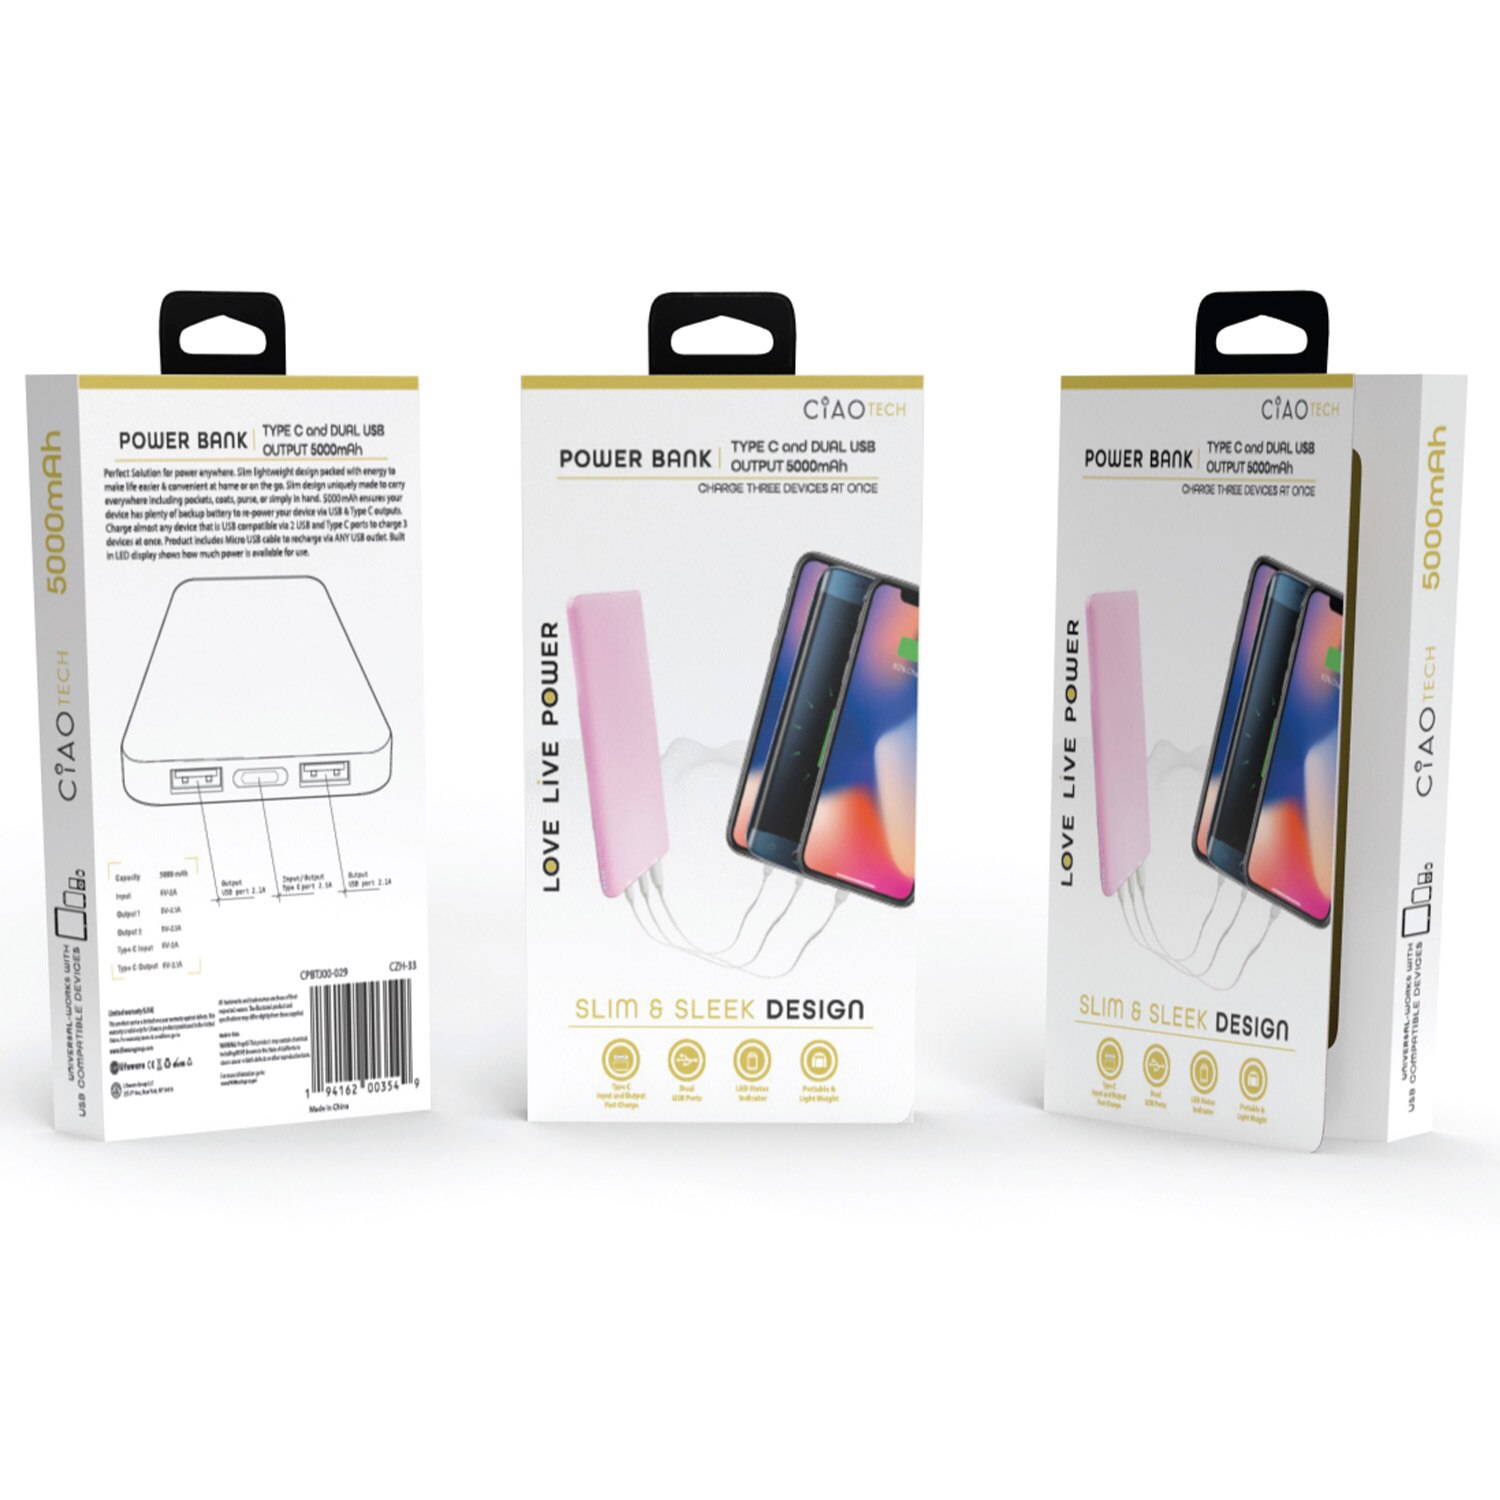 Portable Super Slim Fast Charge Powerbank- Pink.